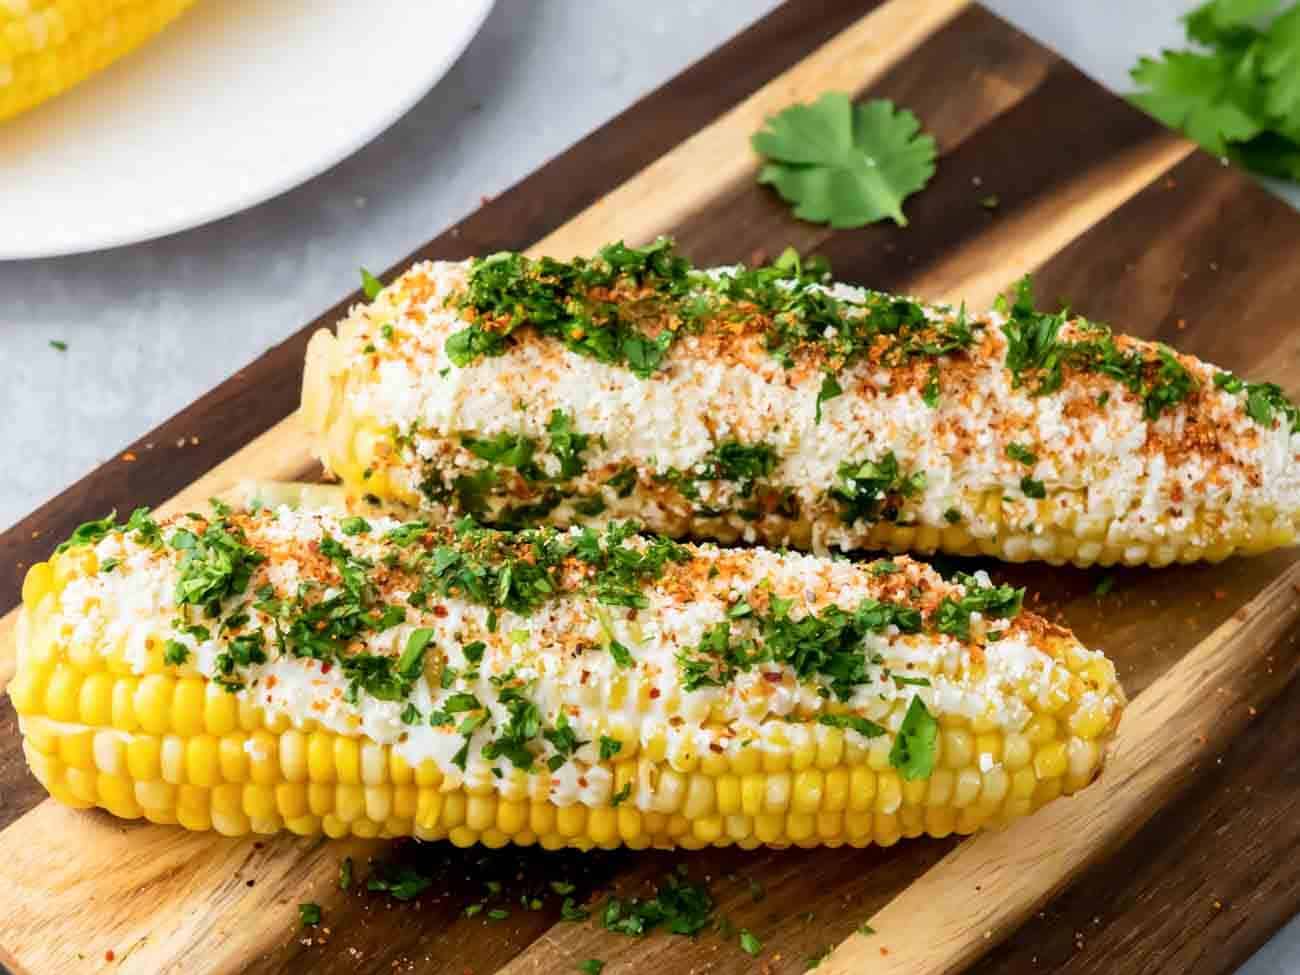 Two corn on the cob on a wooden cutting board.